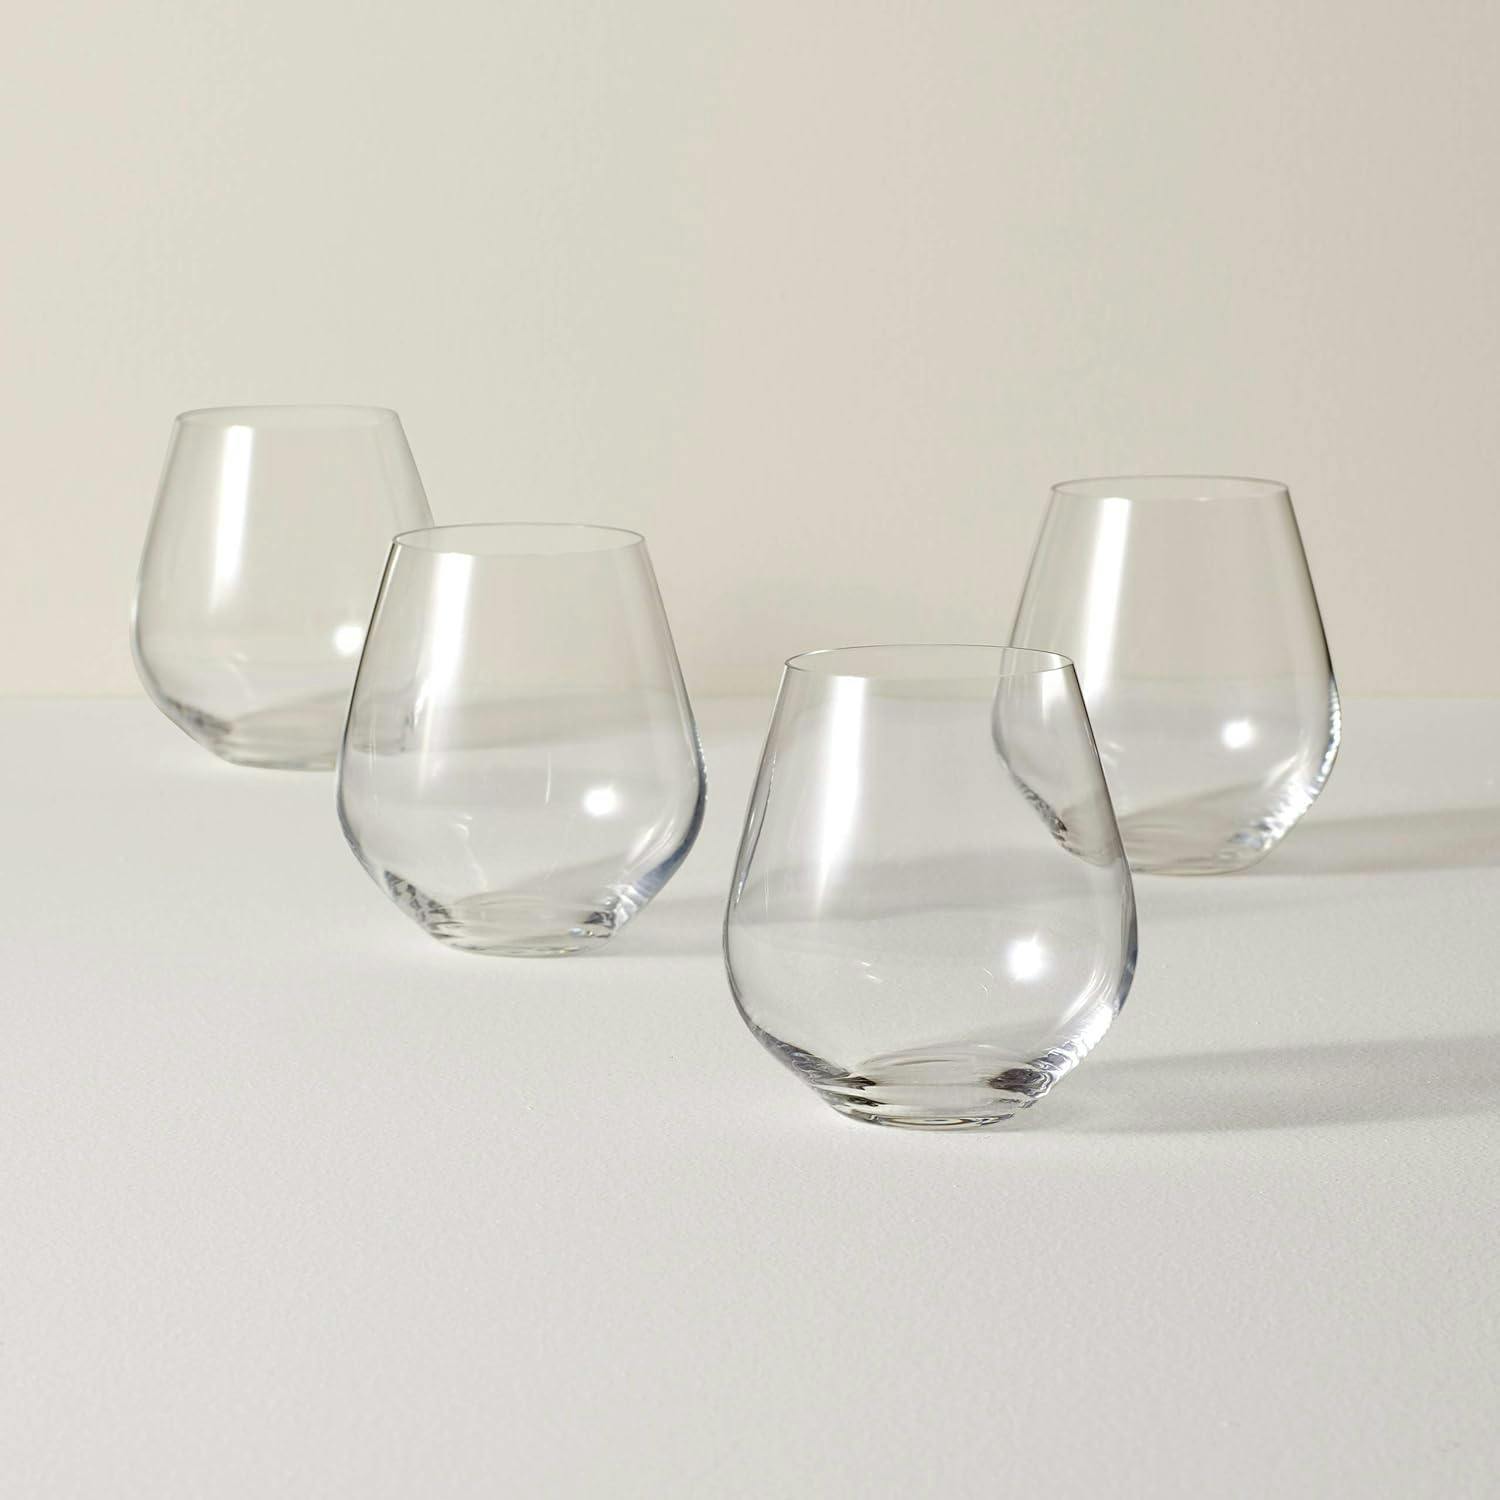 Slovakian Simply Red Fine Crystal Tumbler Set, 4 Count